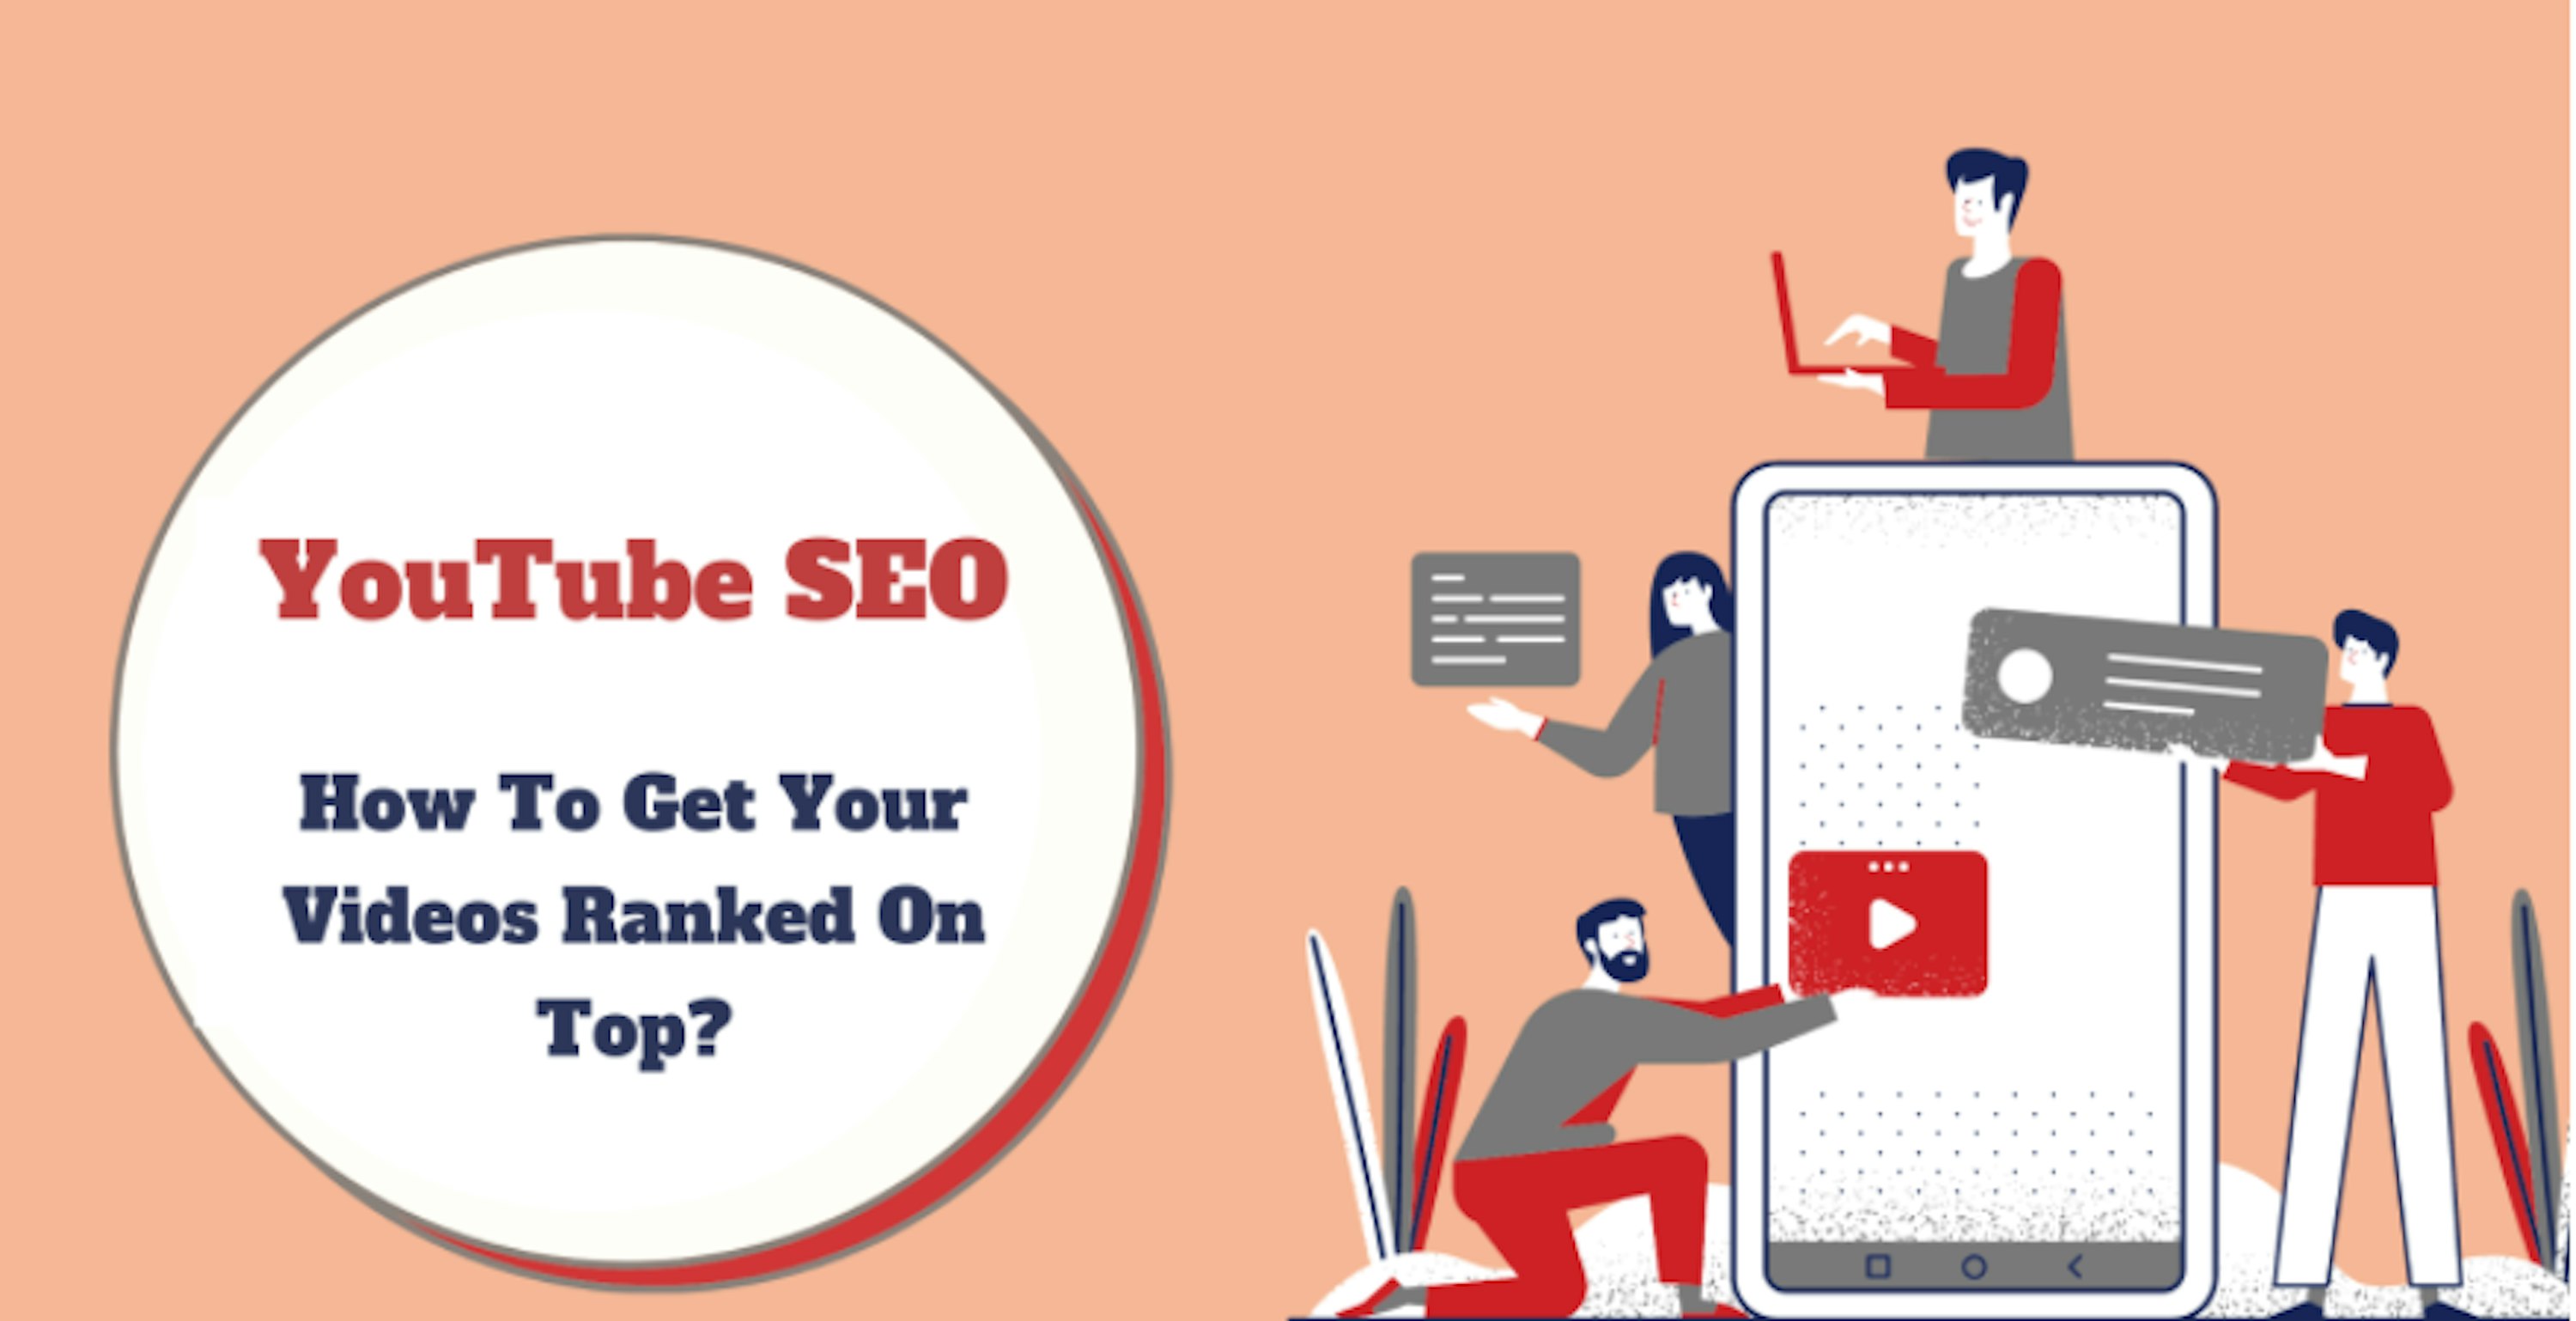 YOUTUBE SEO: HOW TO GET YOUR VIDEOS RANKED ON TOP?